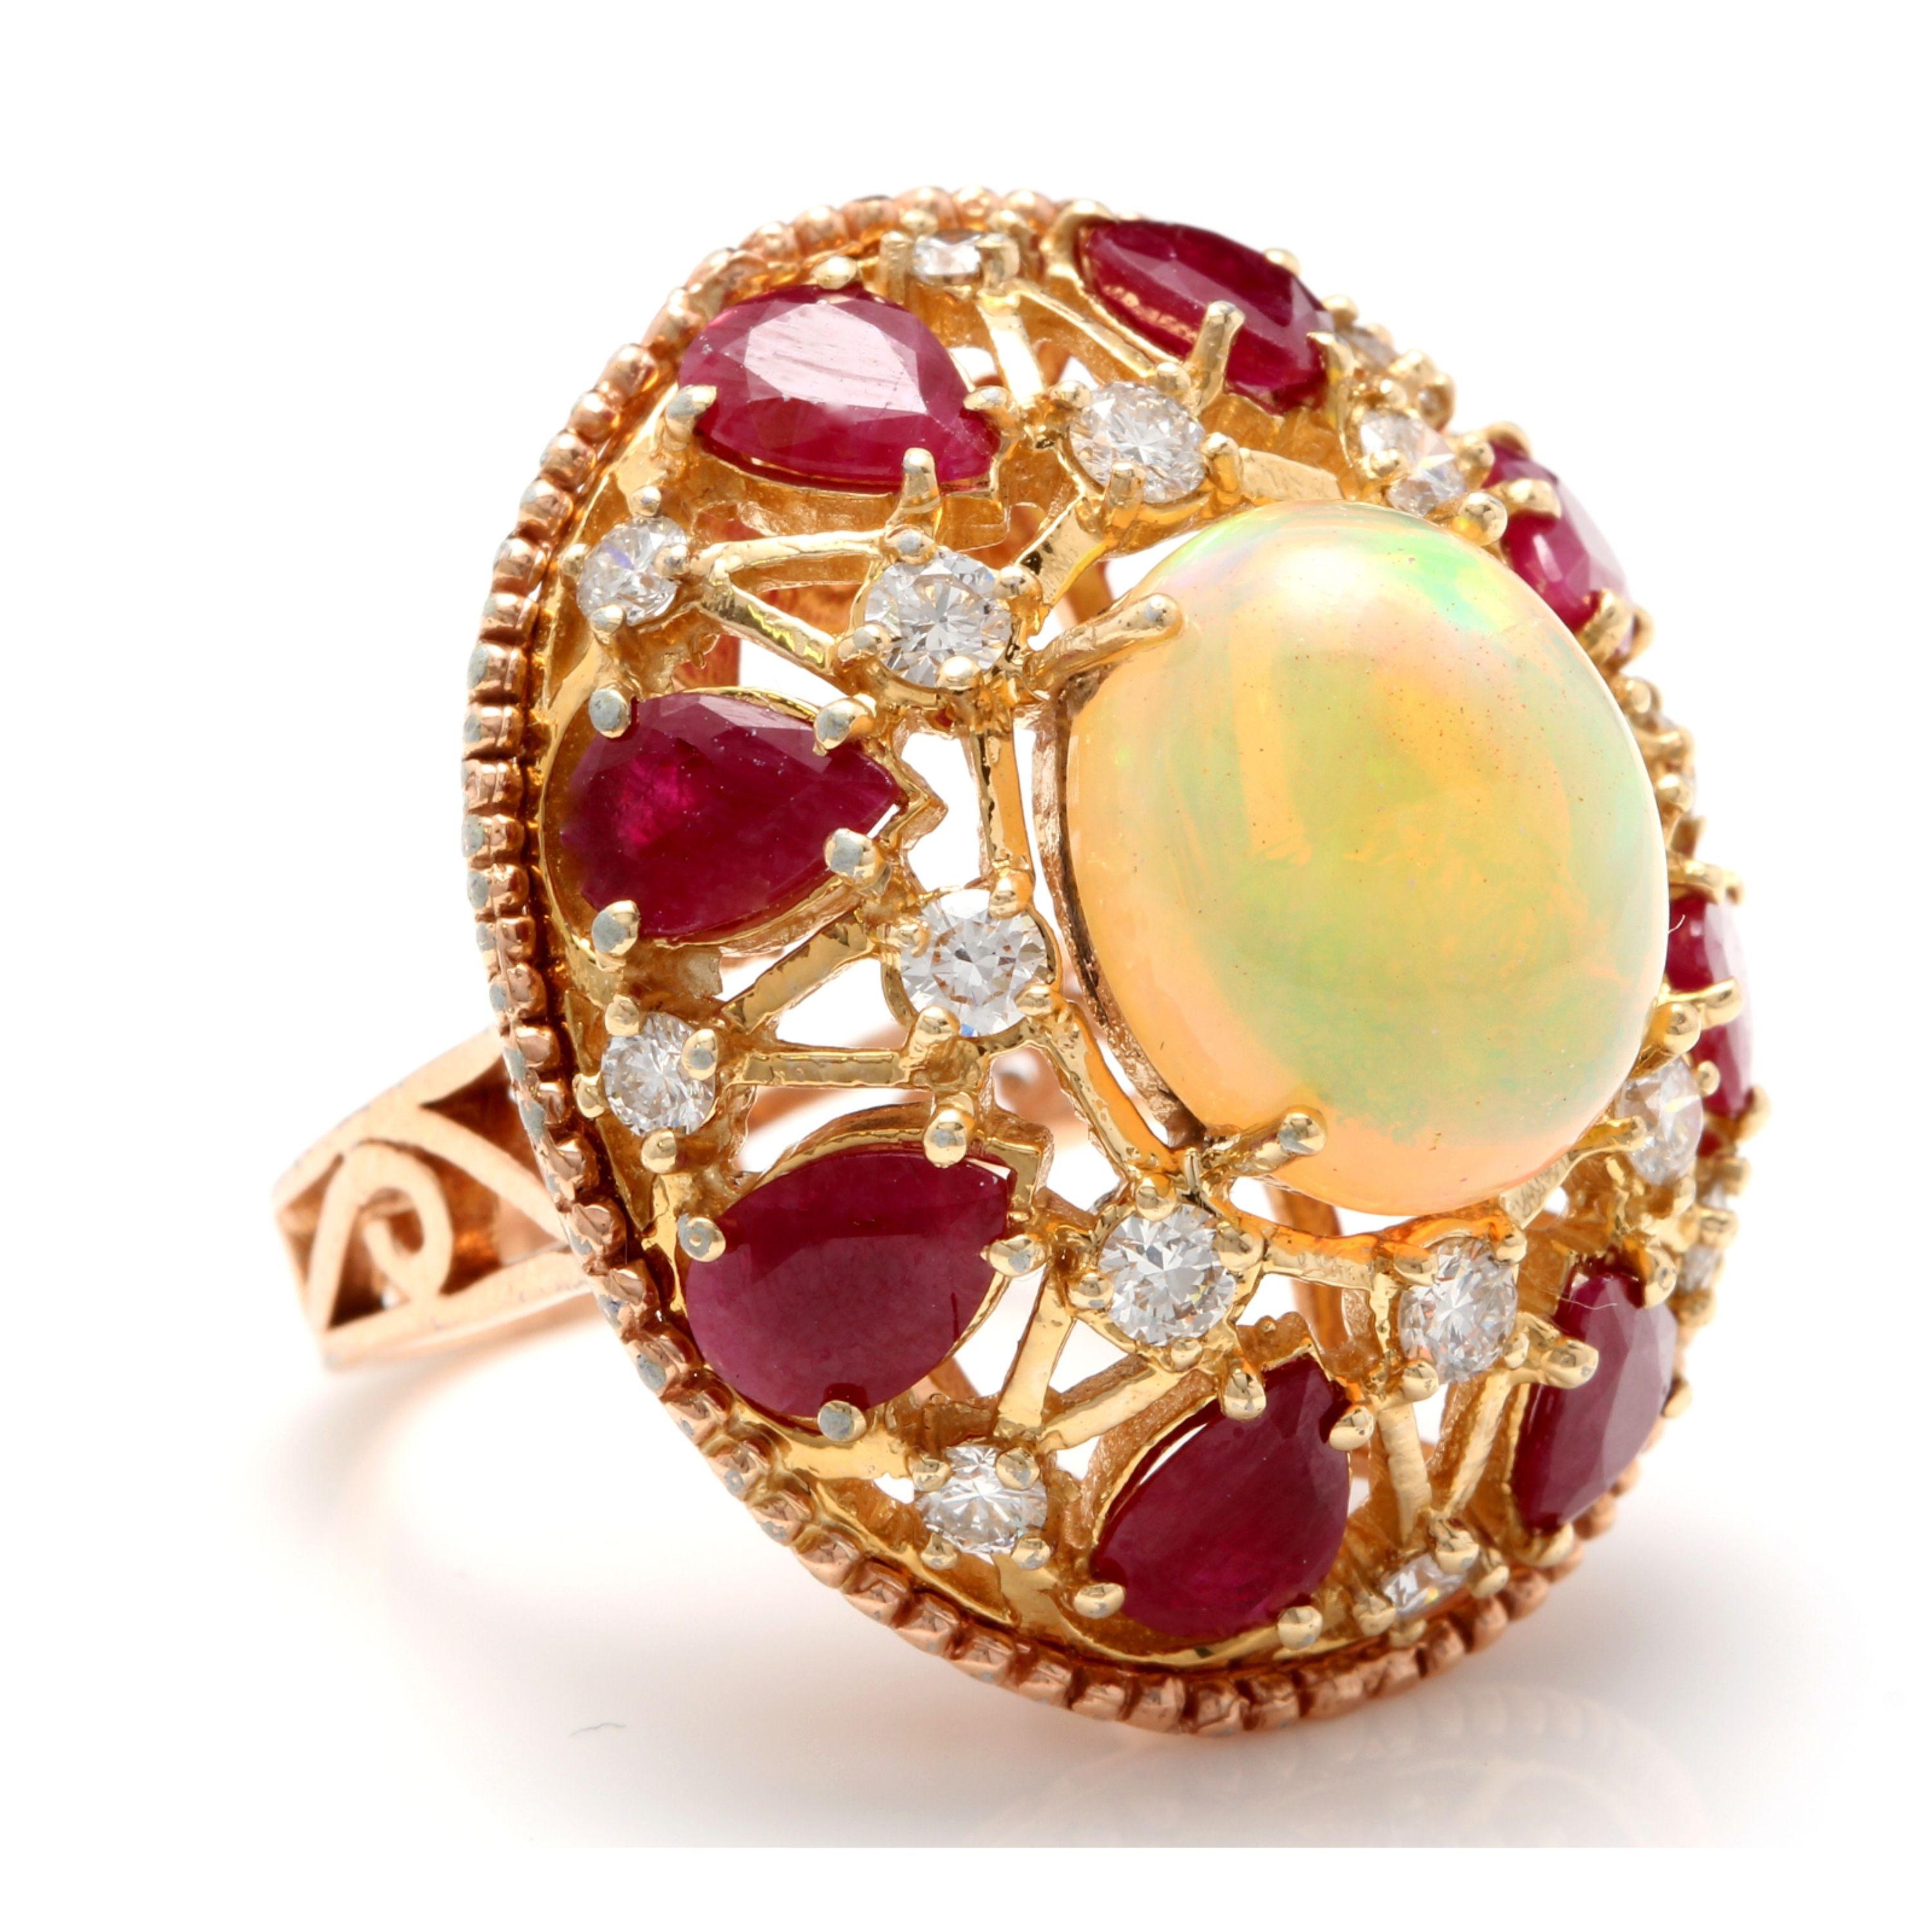 17.40 Carats Natural Impressive Ethiopian Opal, Ruby and Diamond 14K Solid Rose Gold Ring

Total Natural Opal Weight is: Approx. 6.30 Carats

Total Natural Round Diamonds Weight: Approx. 1.10 Carats (color G-H / Clarity SI1-SI2)

Top of the ring